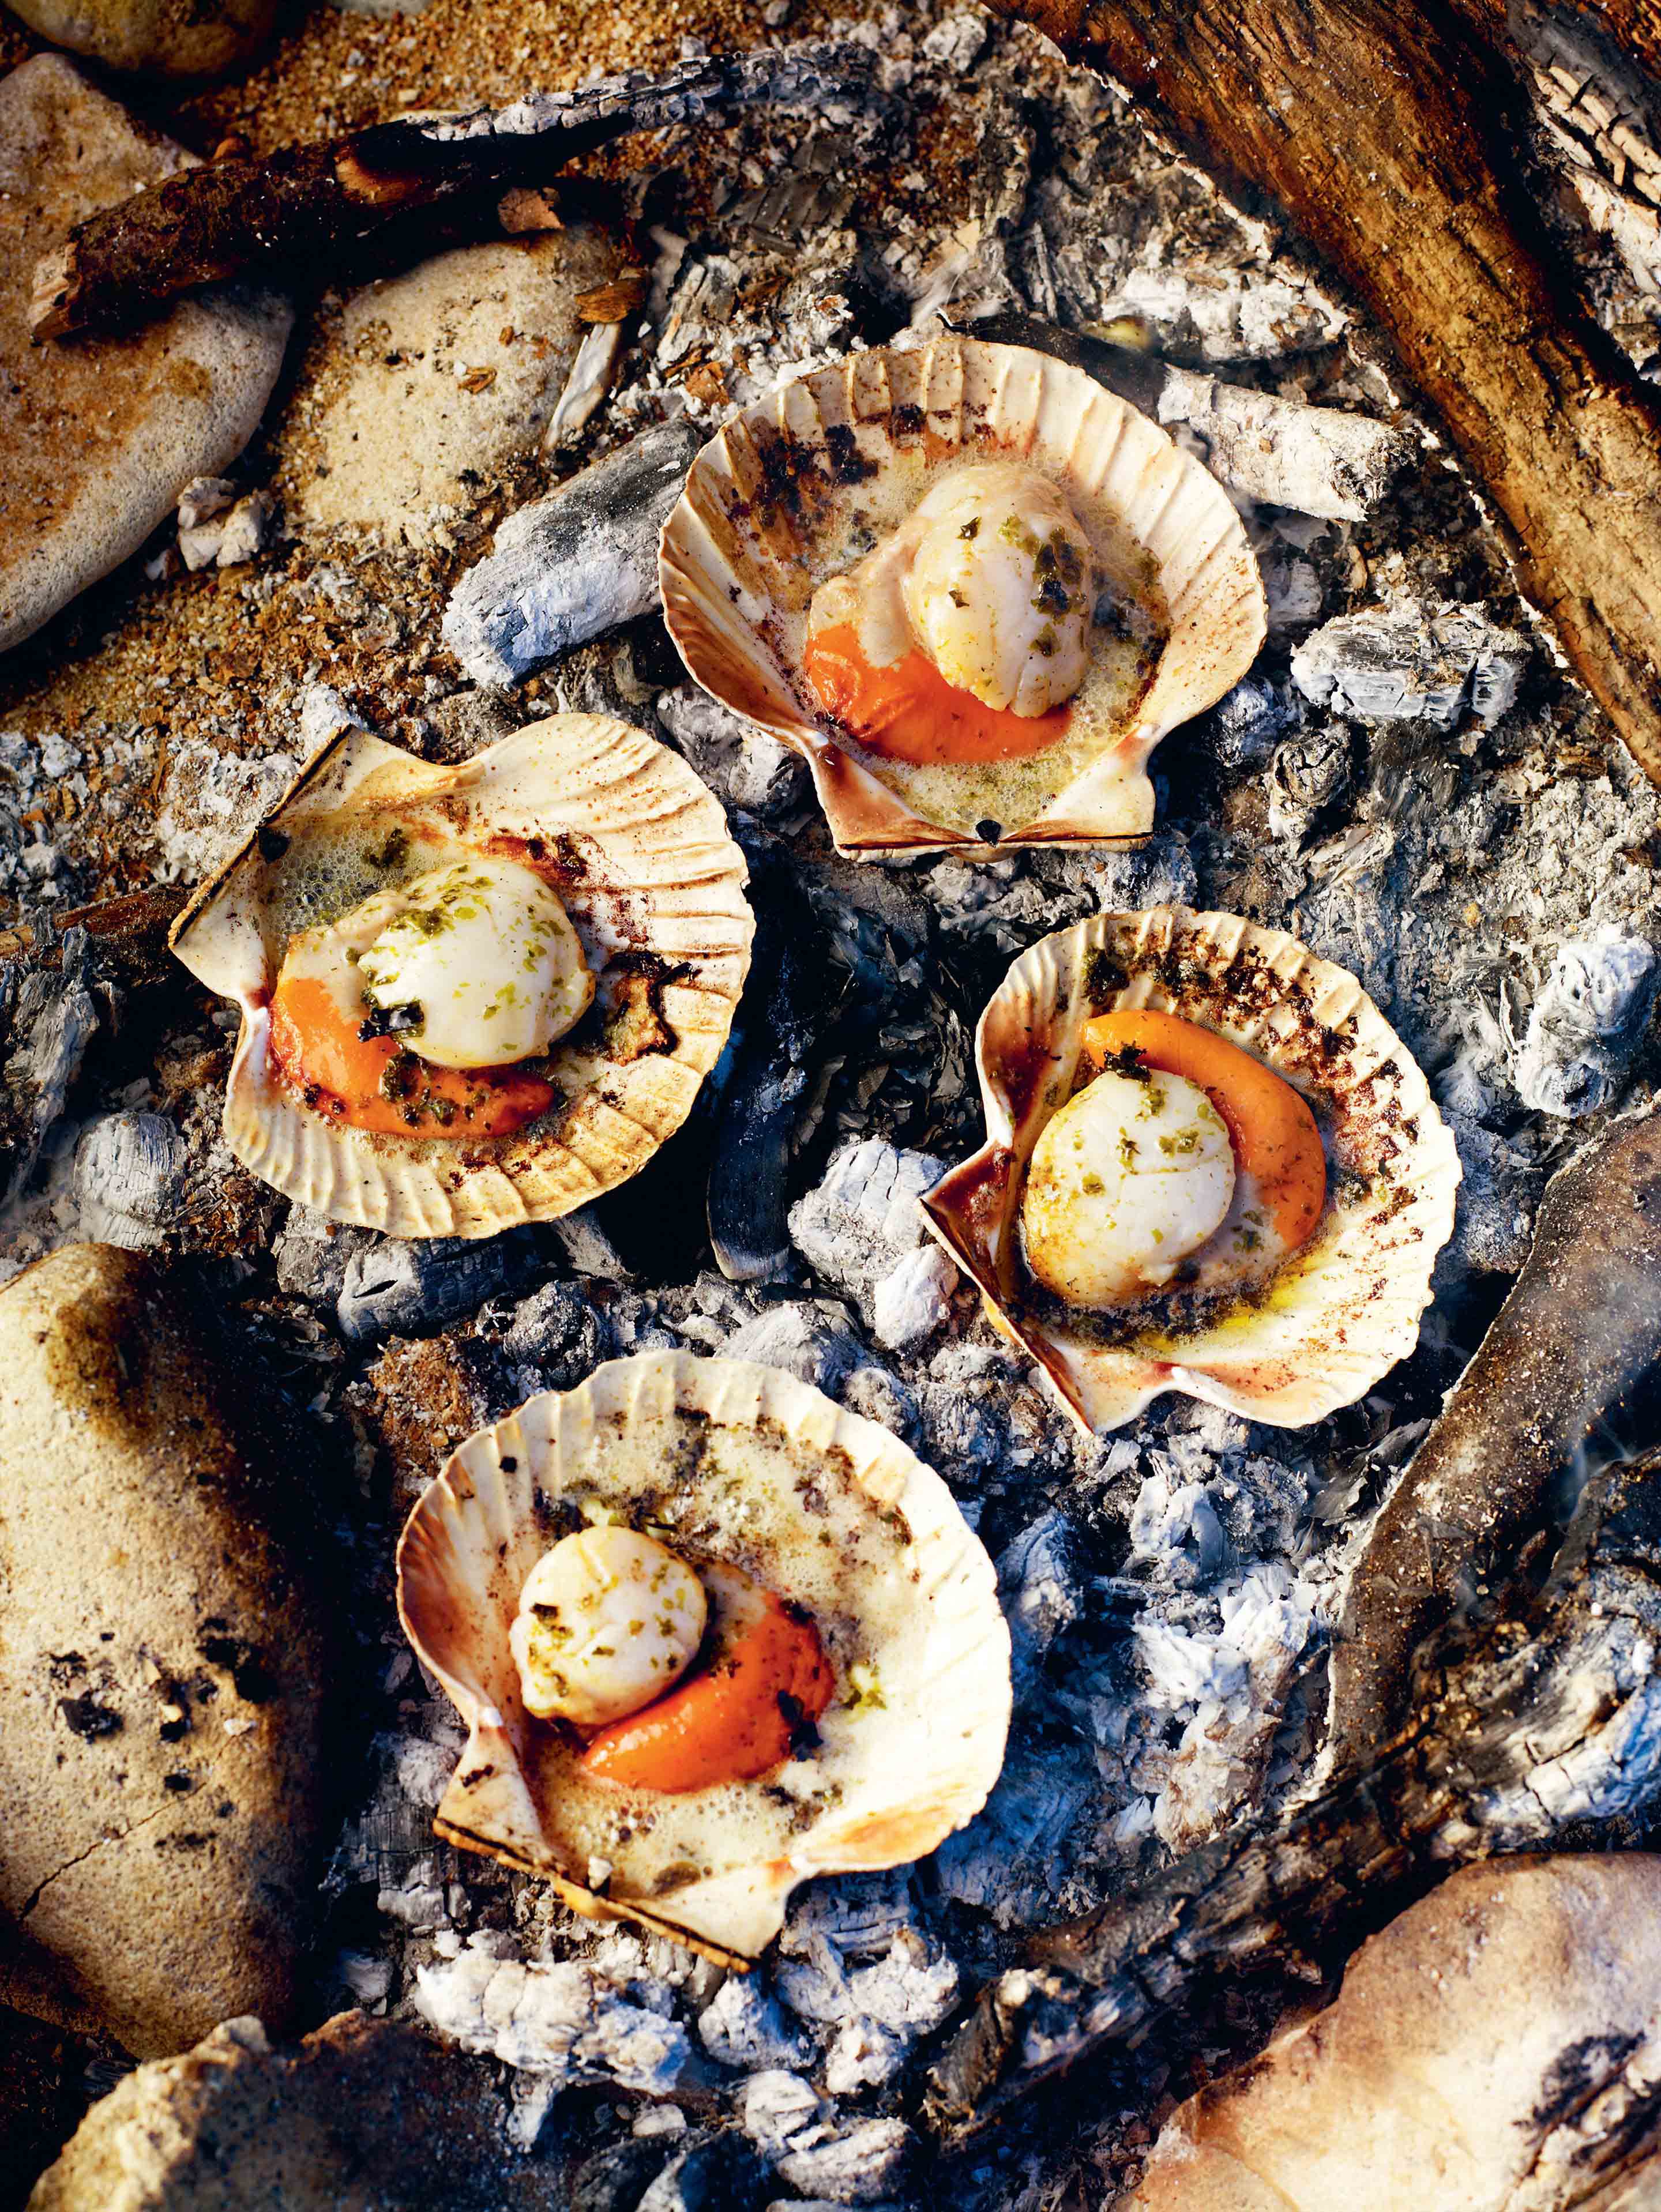 Scallops cooked in fire embers with seaweed butter